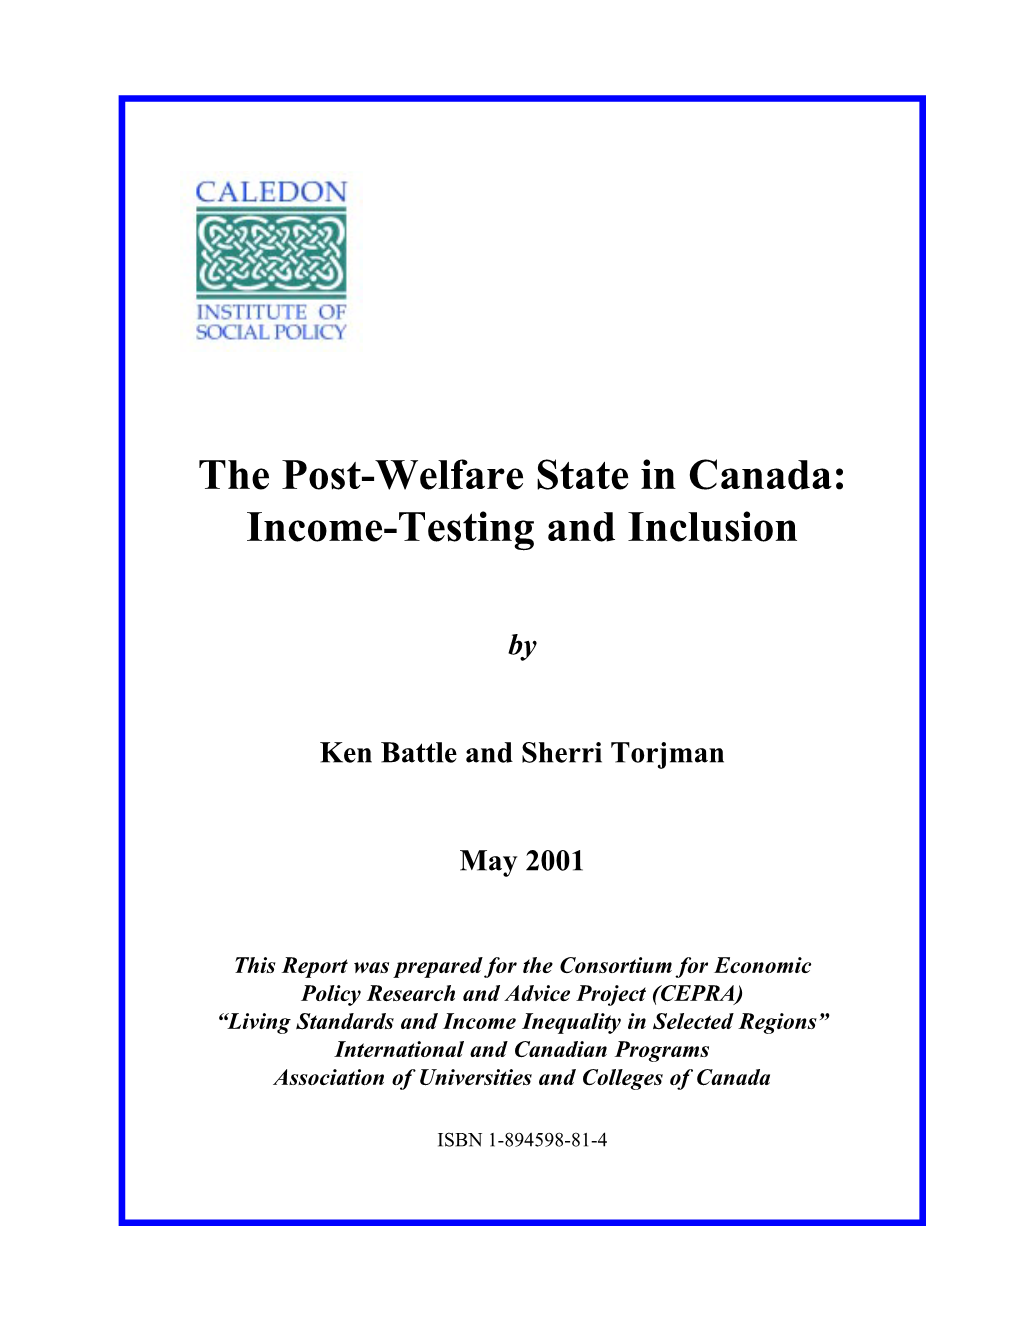 The Post-Welfare State in Canada: Income-Testing and Inclusion